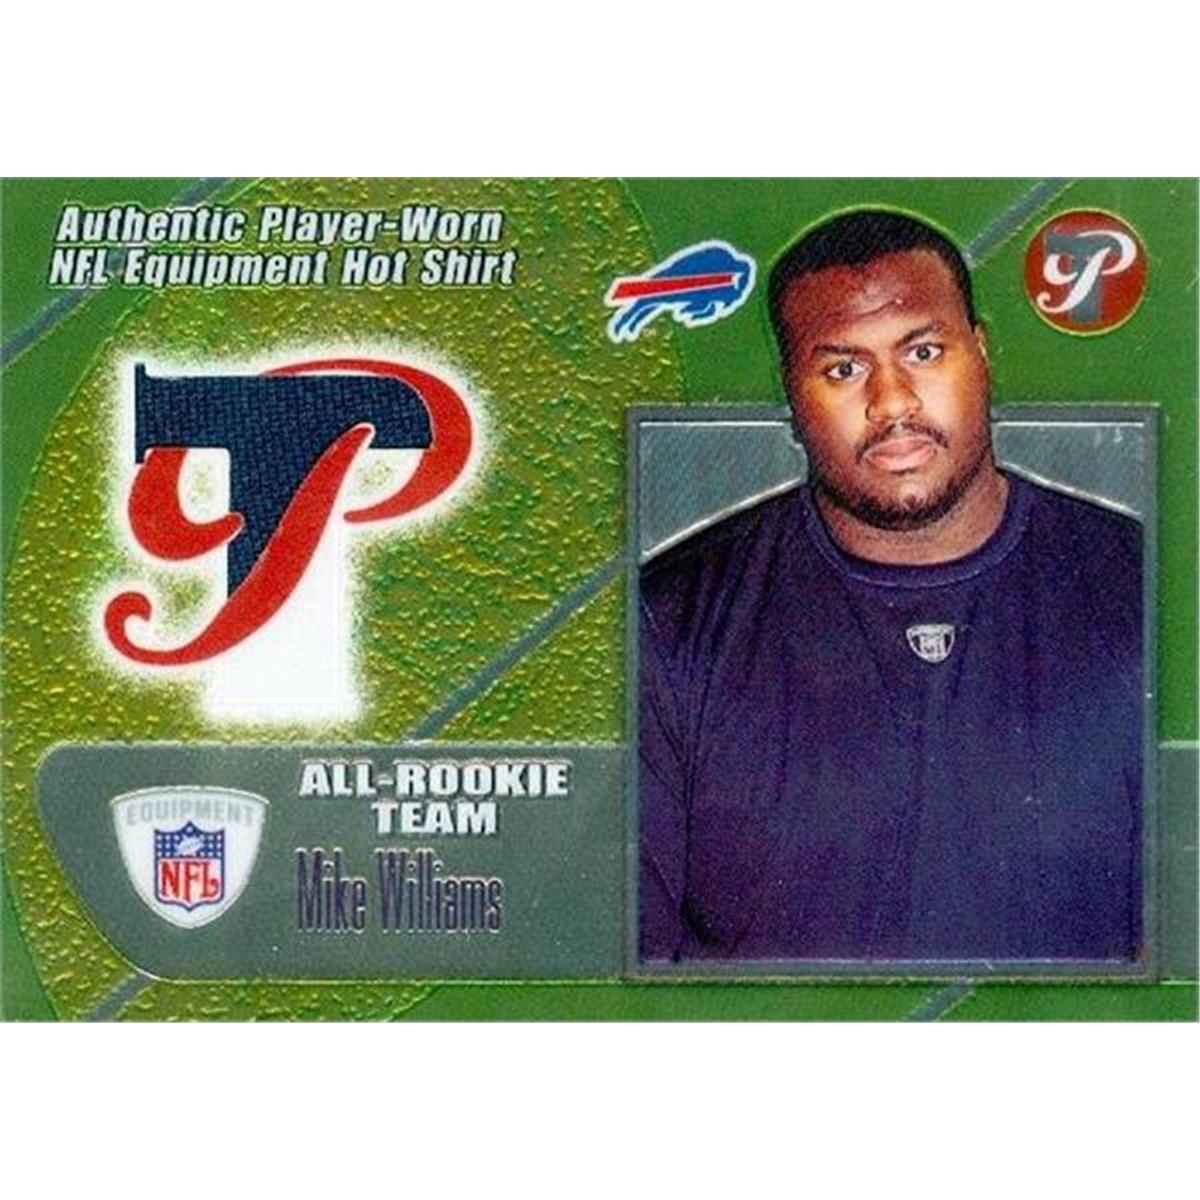 345008 Mike Williams Player Worn Jersey Patch Football Card - Buffalo Bills 2002 Topps All Rookie No. TRRMW -  Autograph Warehouse